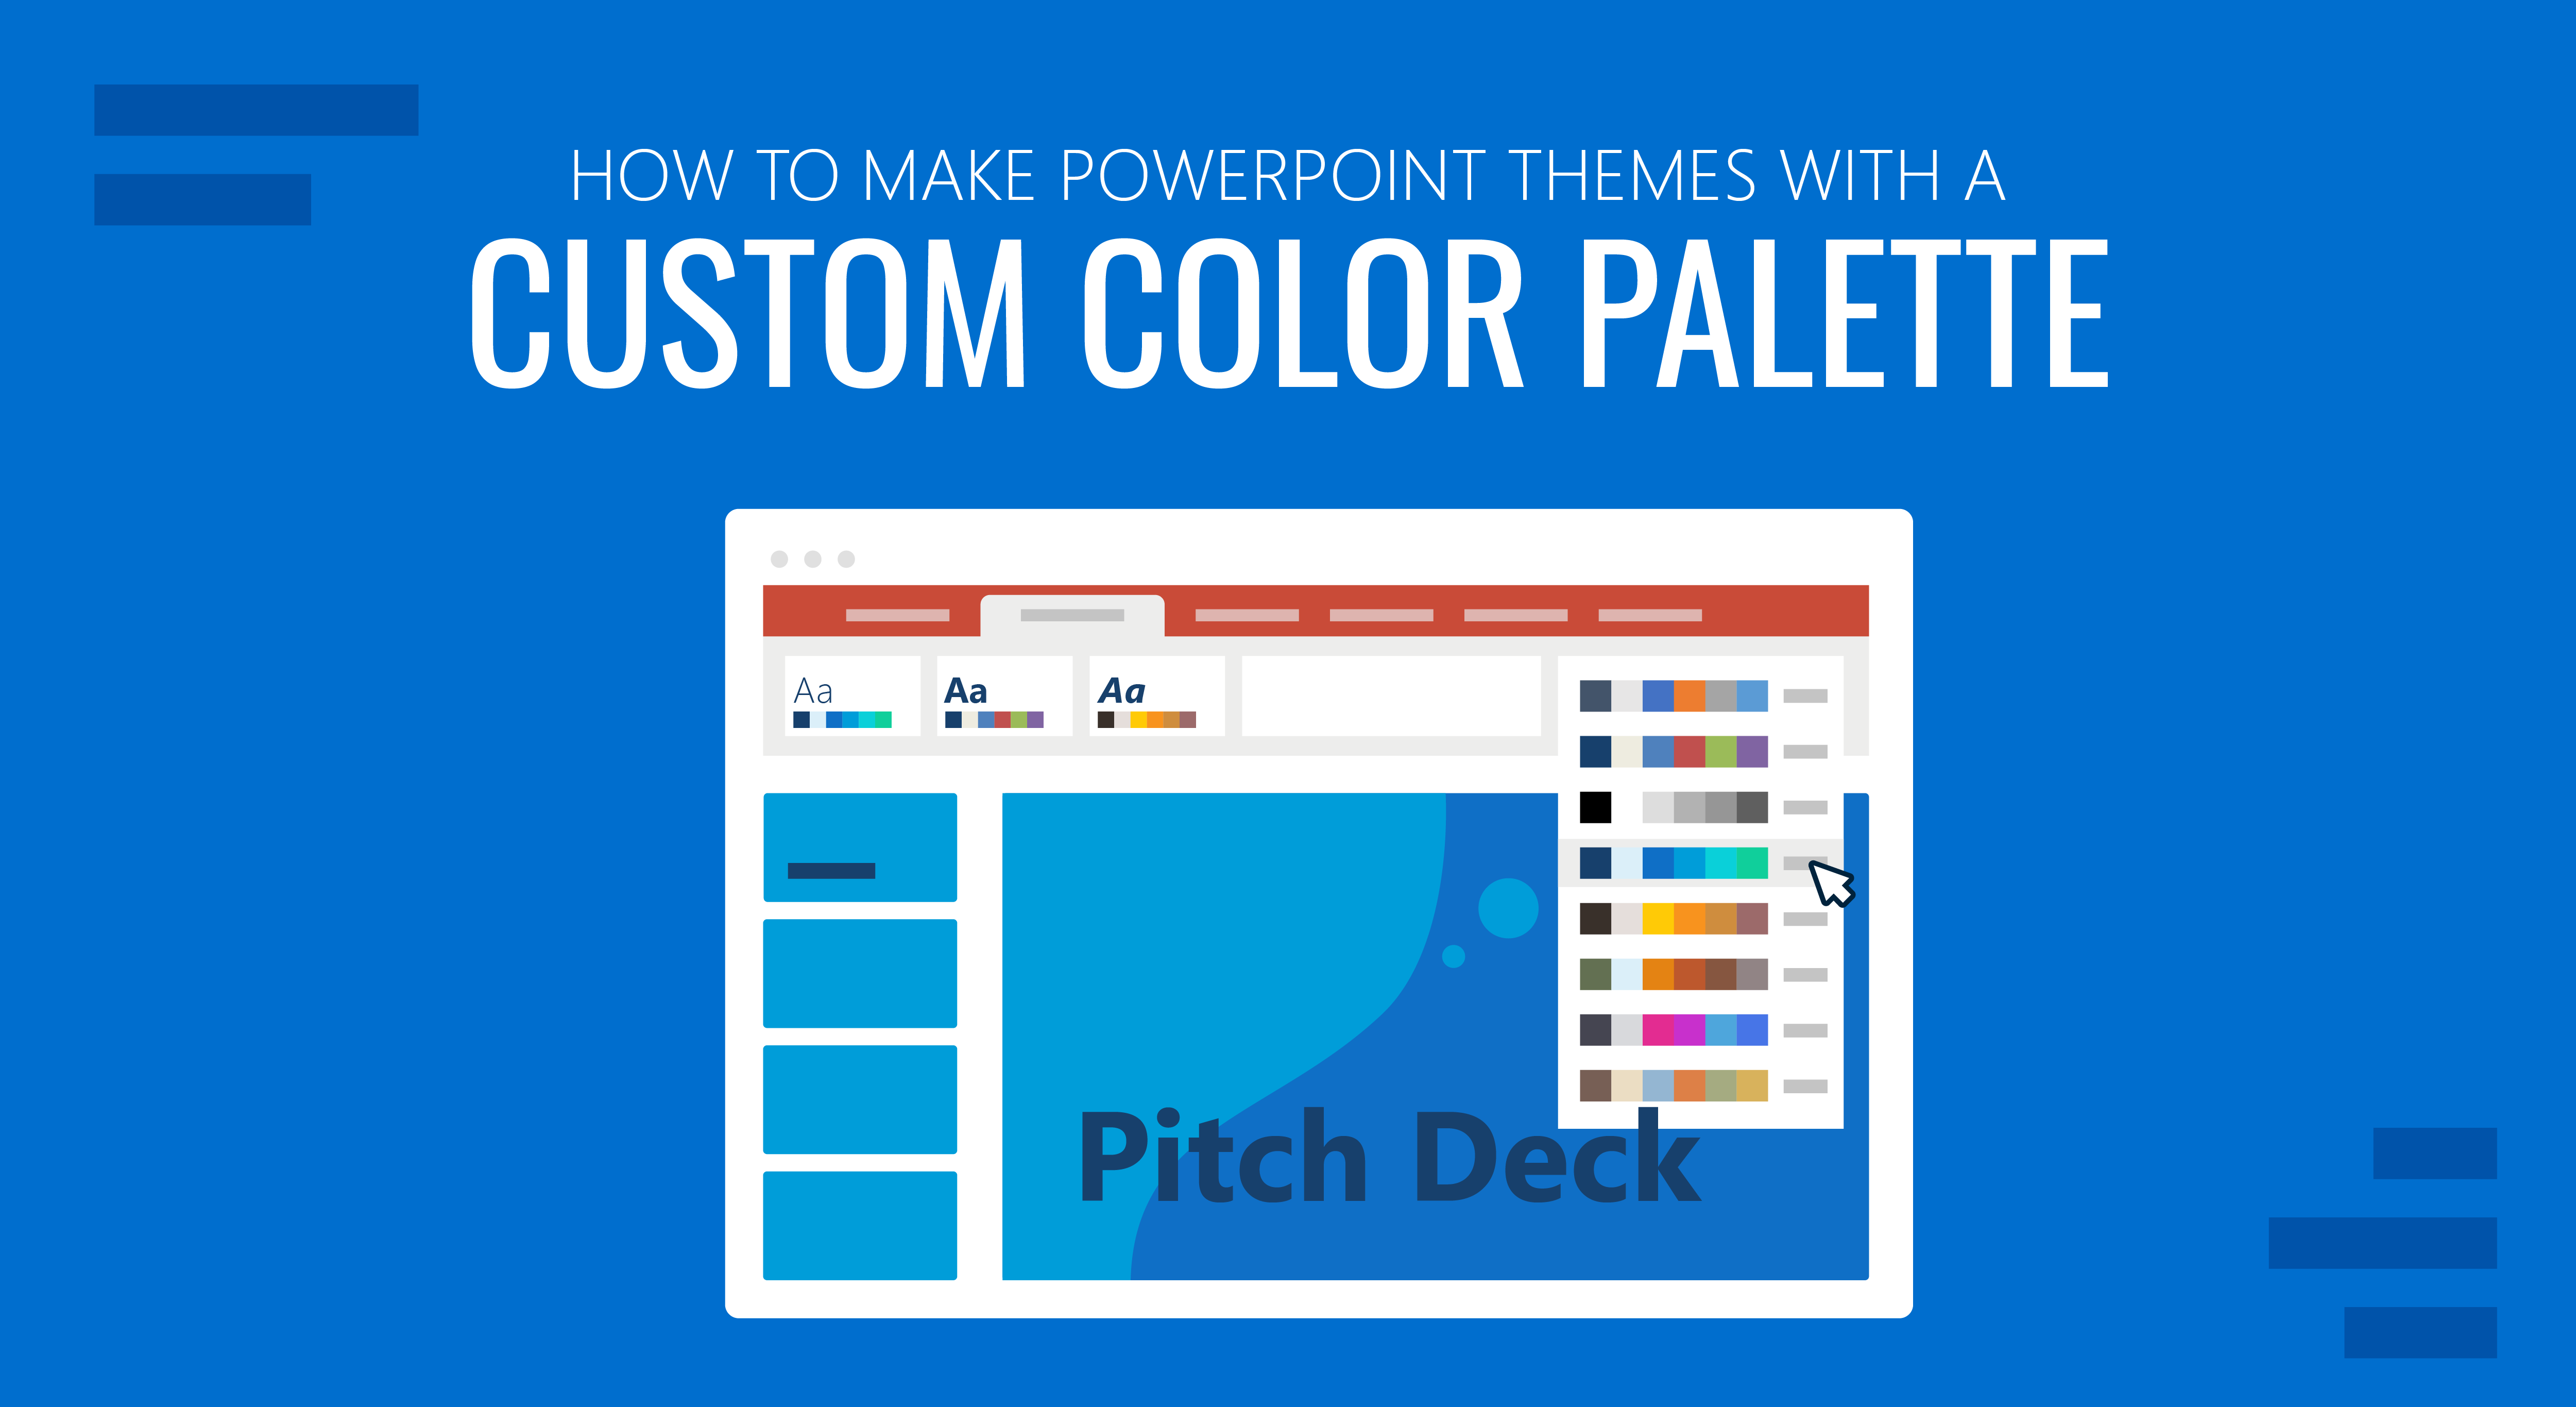 How To Make PowerPoint Themes with a Custom Color Palette